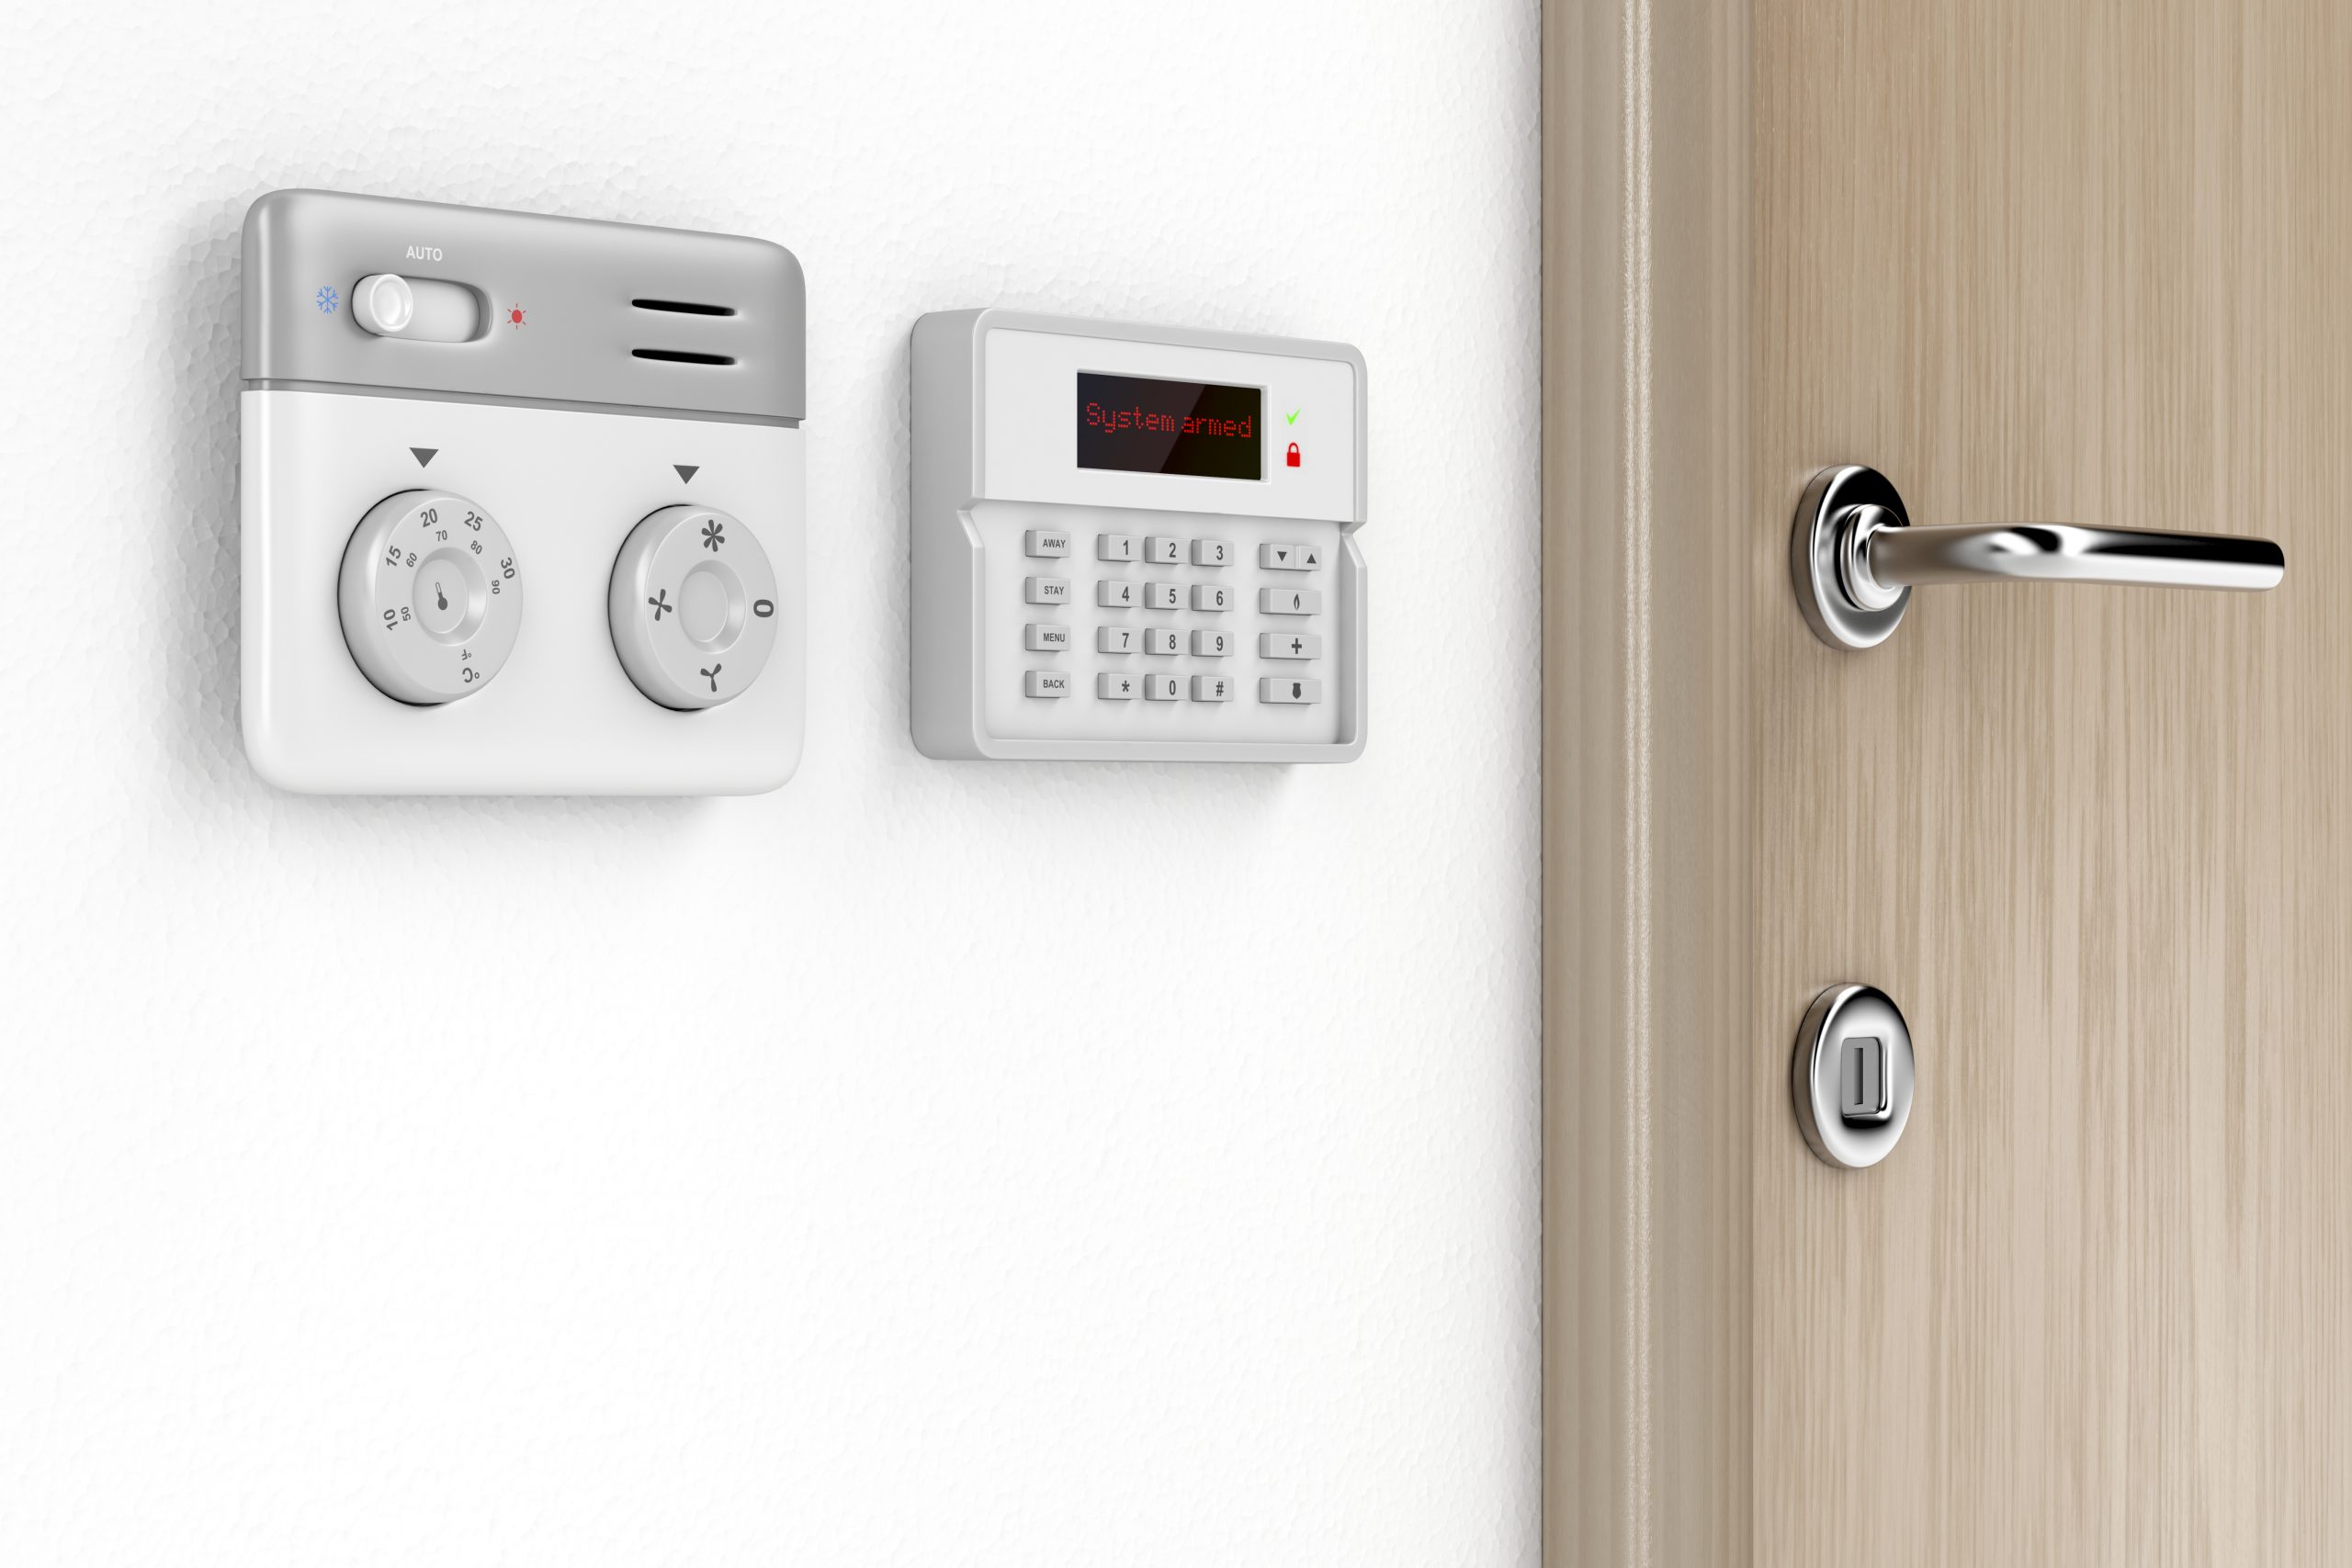 What Types Of Security Are Alarm Systems